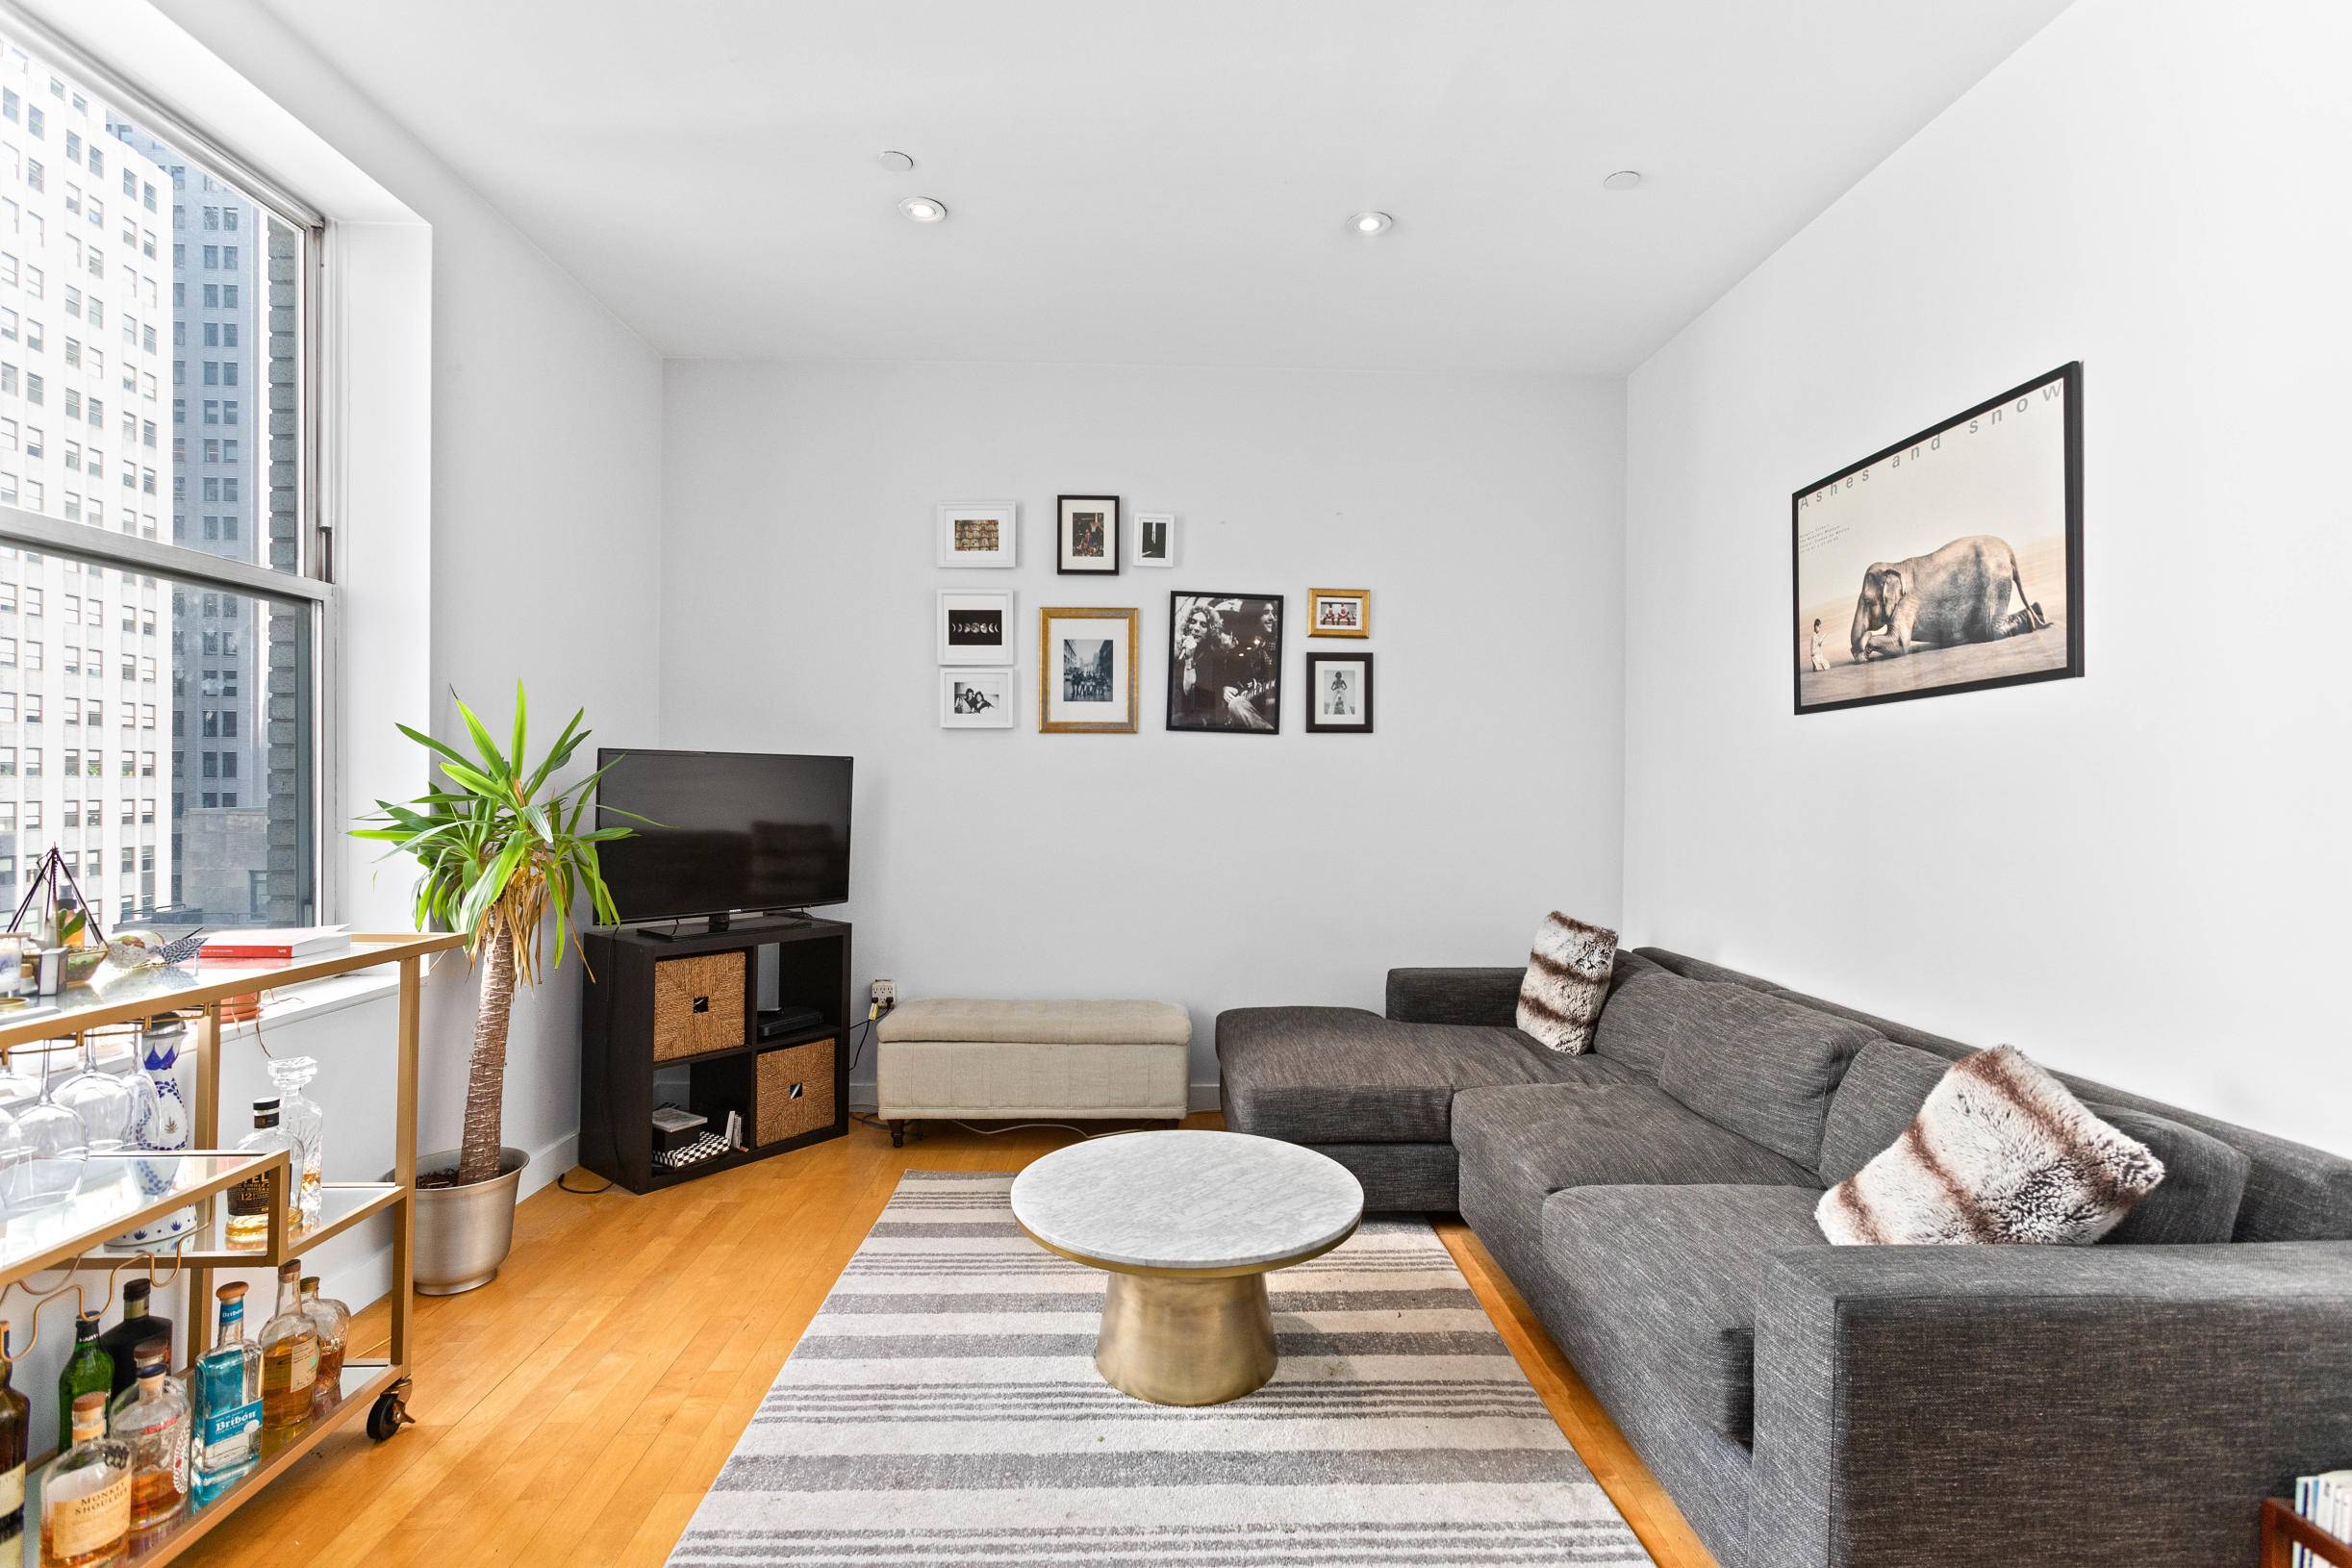 This mint condition, open loft style space has been thoughtfully redesigned to create a very comfortable and thoroughly modern one bedroom home.